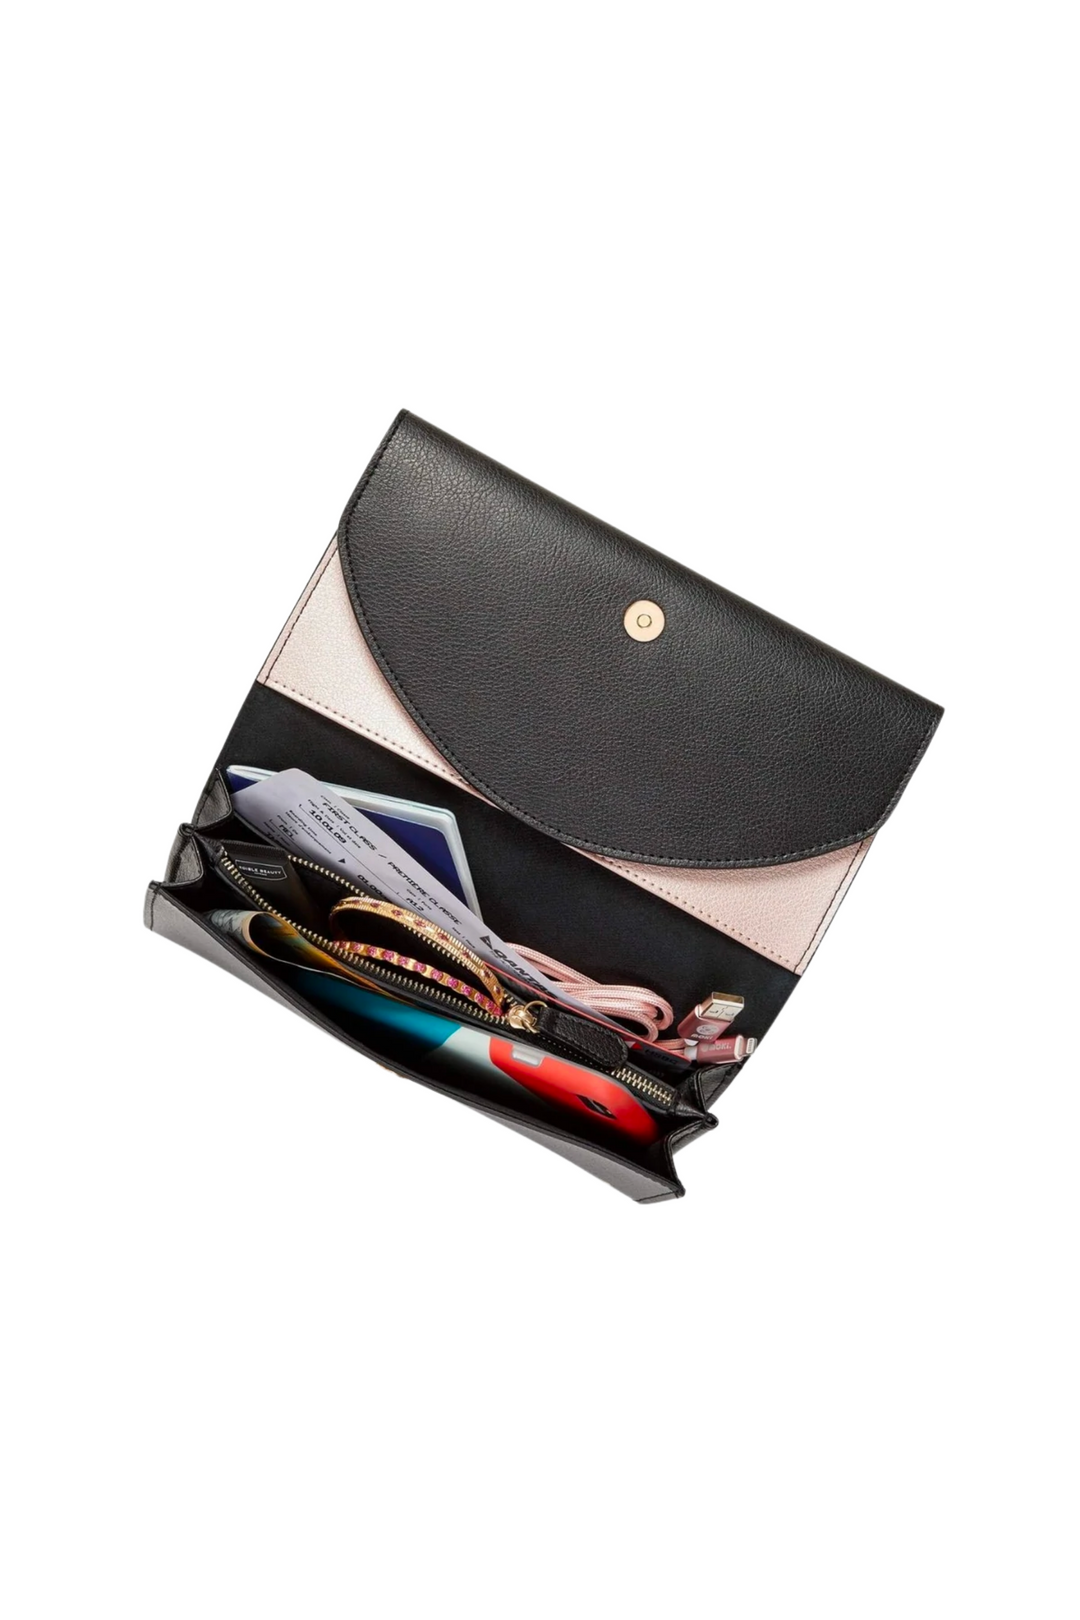 The Elsewhere Co. Sustainable Leather Wallet in Nightfall Black, available on ZERRIN with free Singapore shipping